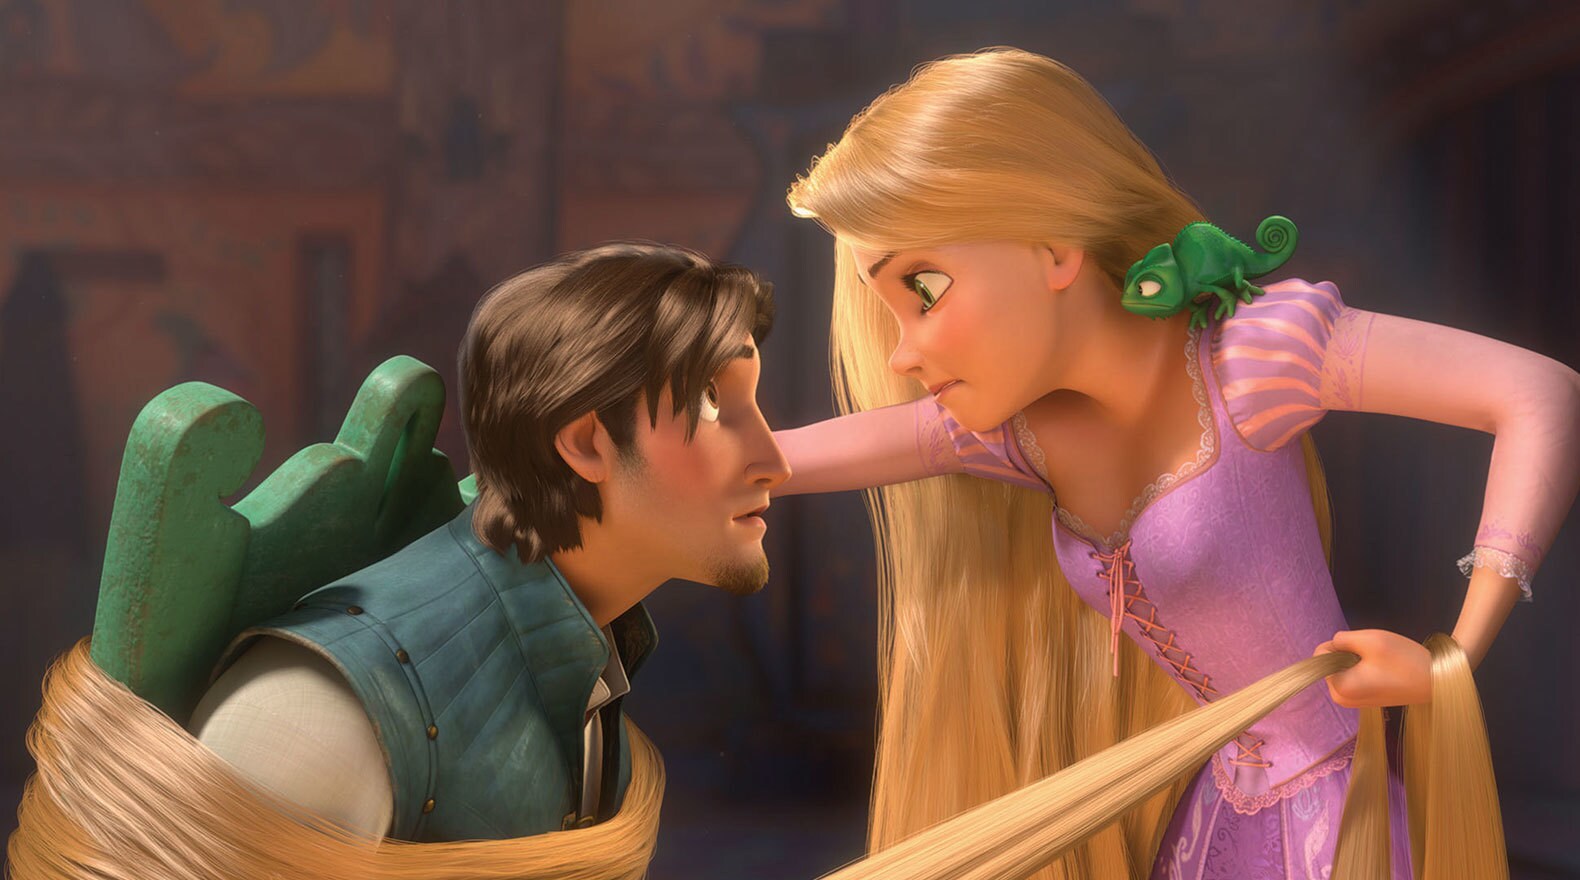 Rapunzel used her hair to pull Flynn Rider closer in the movie Tangled